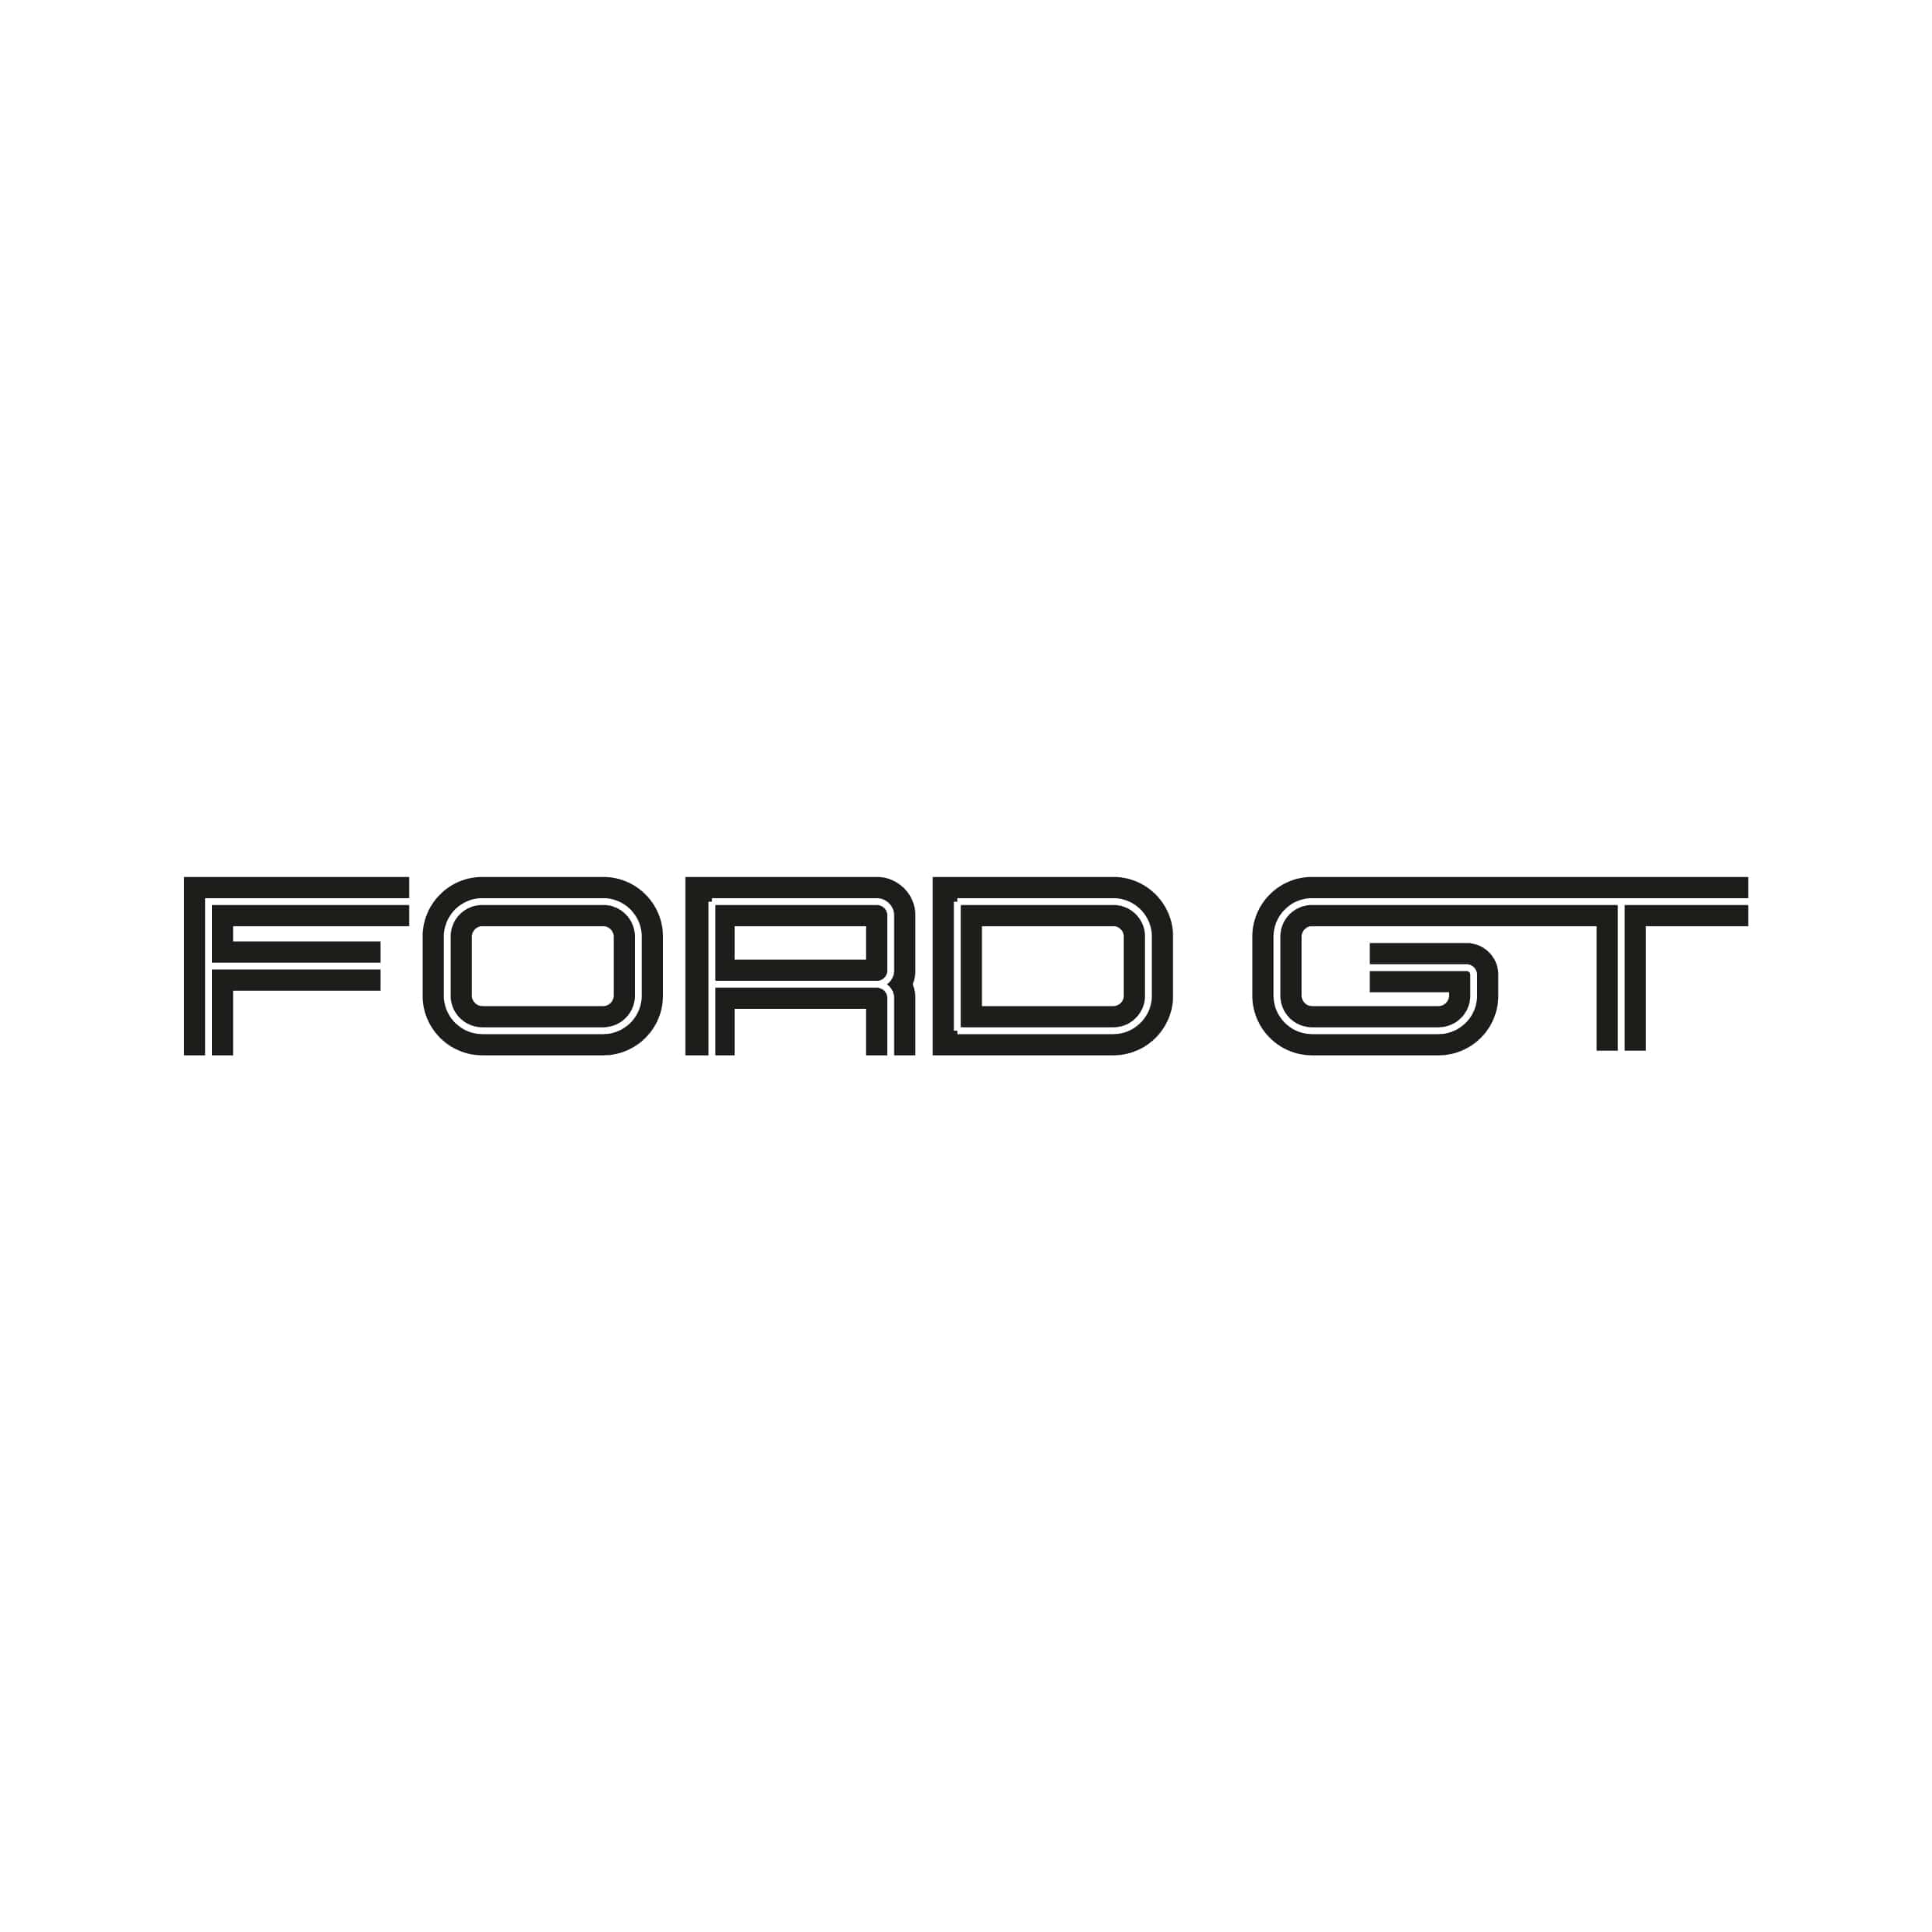 stickers-ford-gt-ref36-autocollant-voiture-sticker-auto-autocollants-decals-sponsors-racing-tuning-sport-logo-min